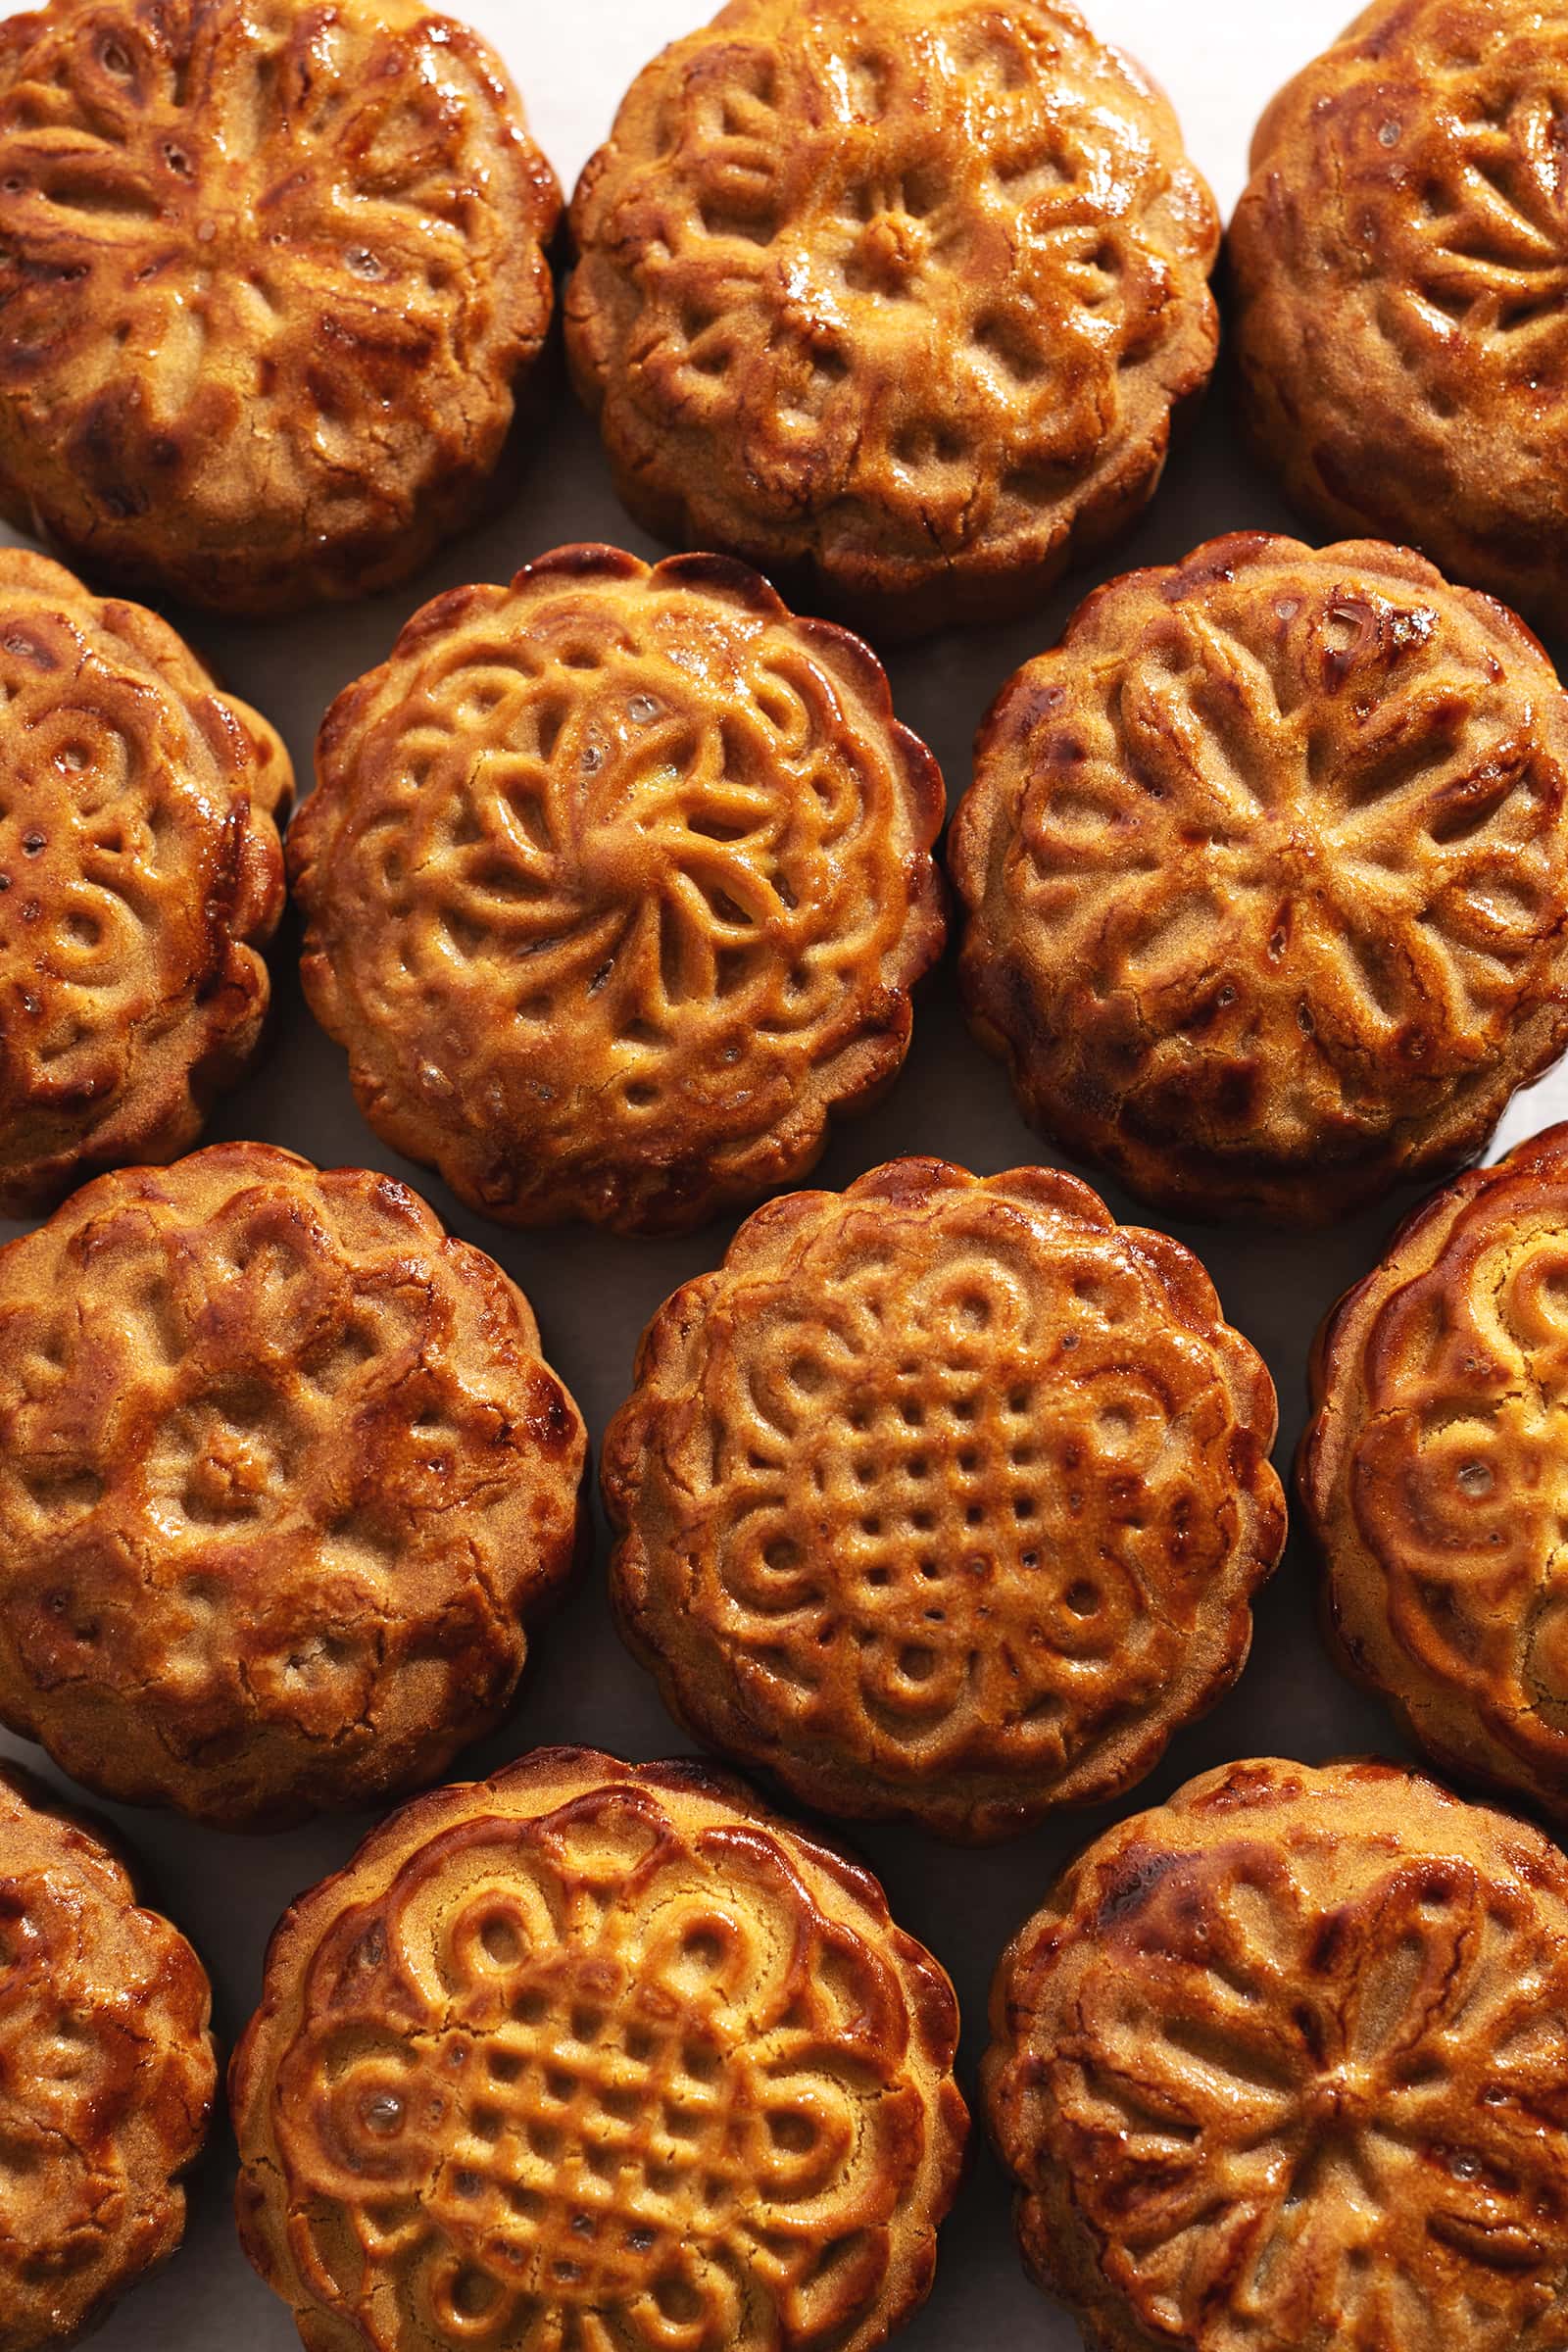 Several baked mooncakes with different designs lined up across the frame.